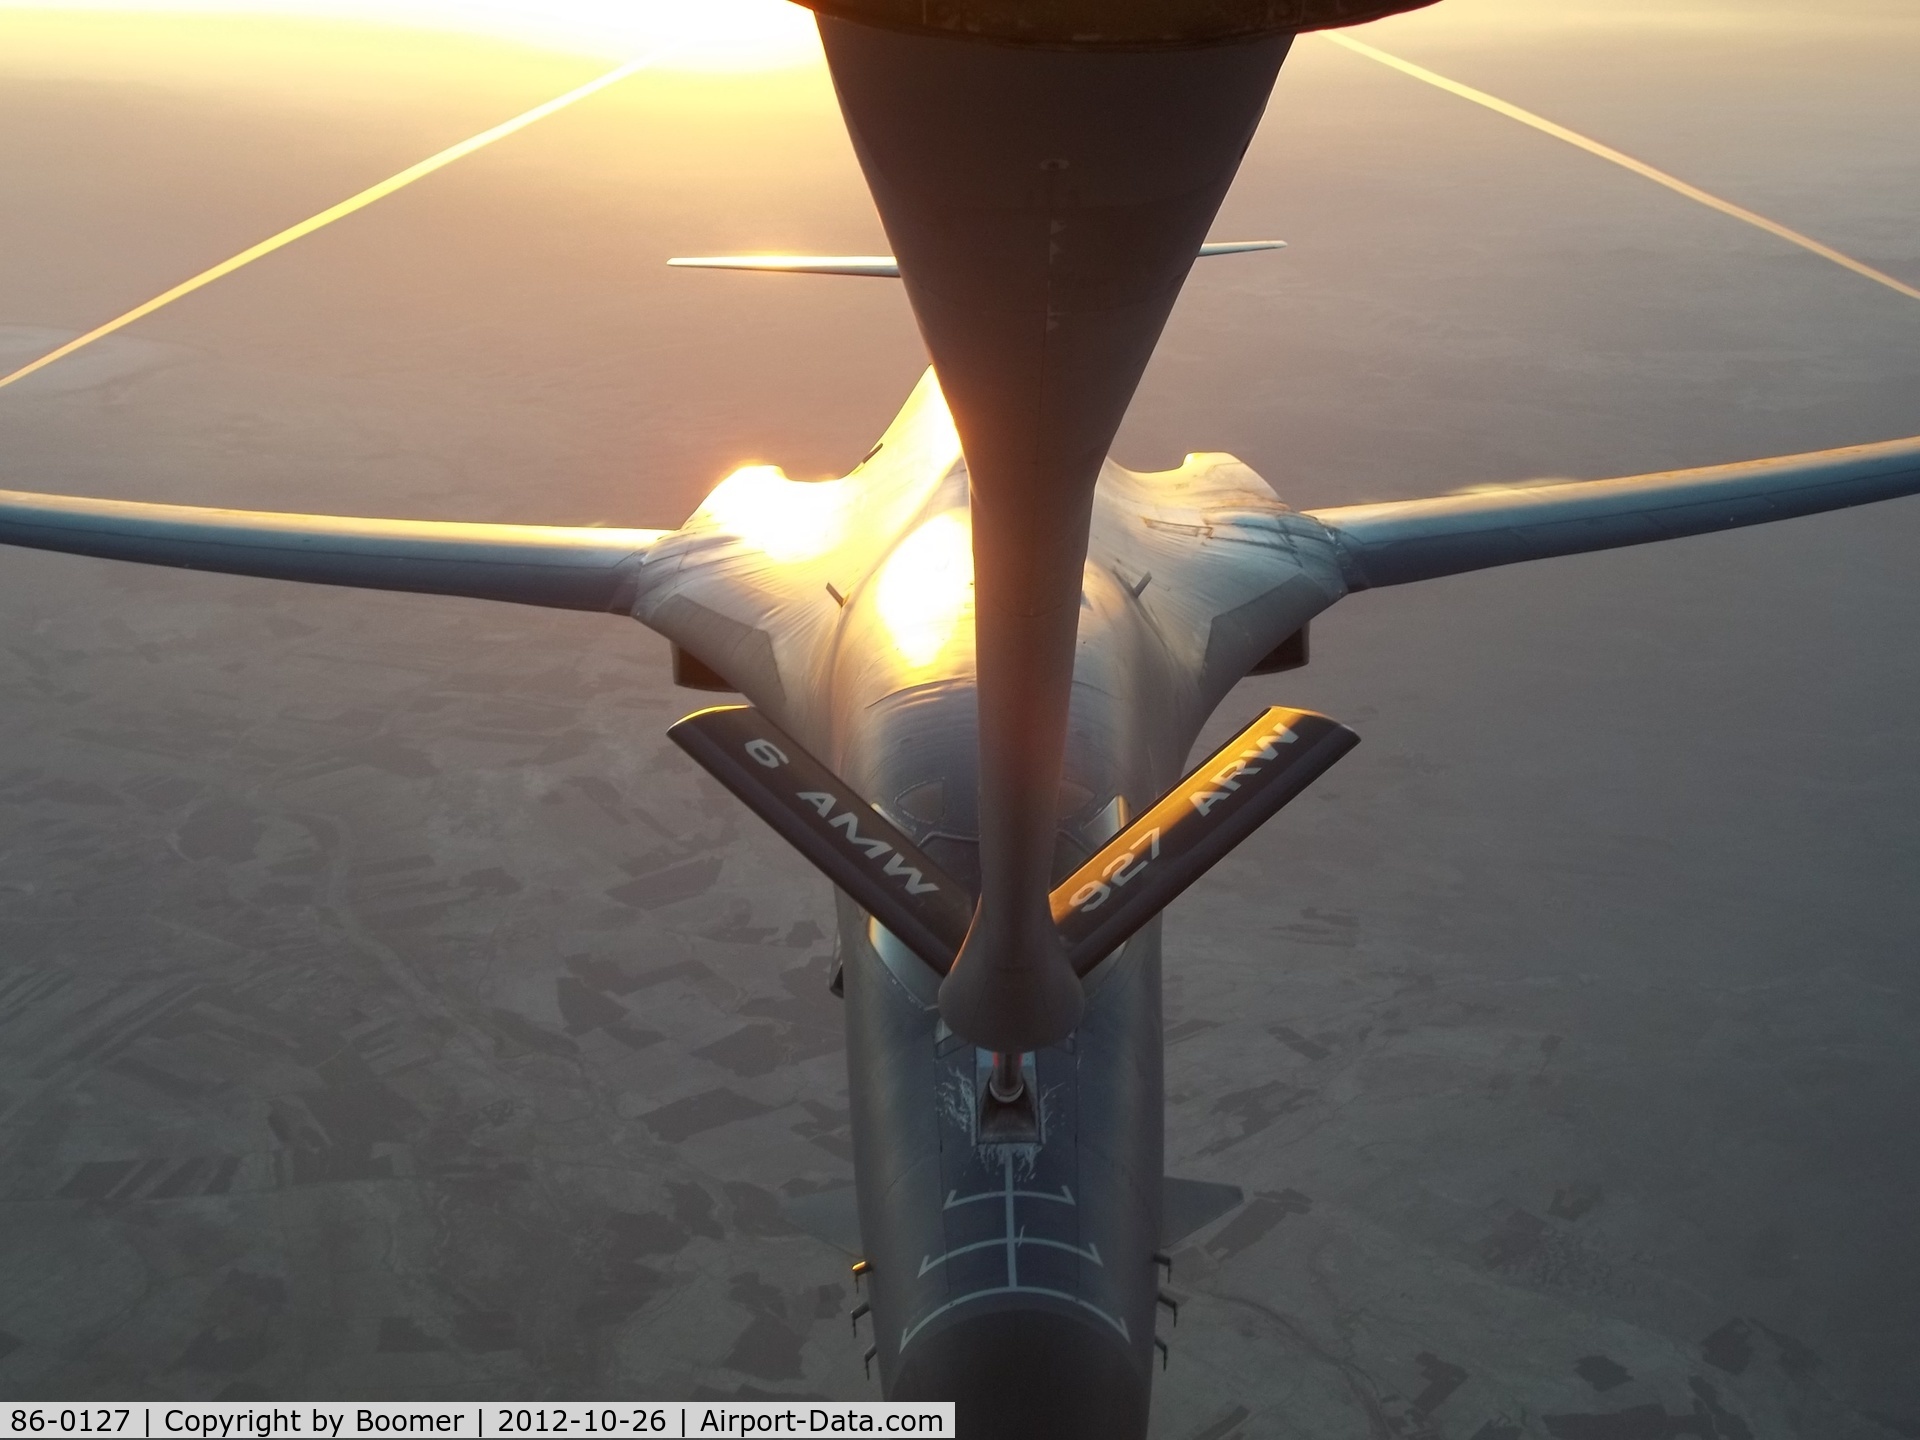 86-0127, 1986 Rockwell B-1B Lancer C/N 87, -0127 refueling from a KC-135 over Afghanistan